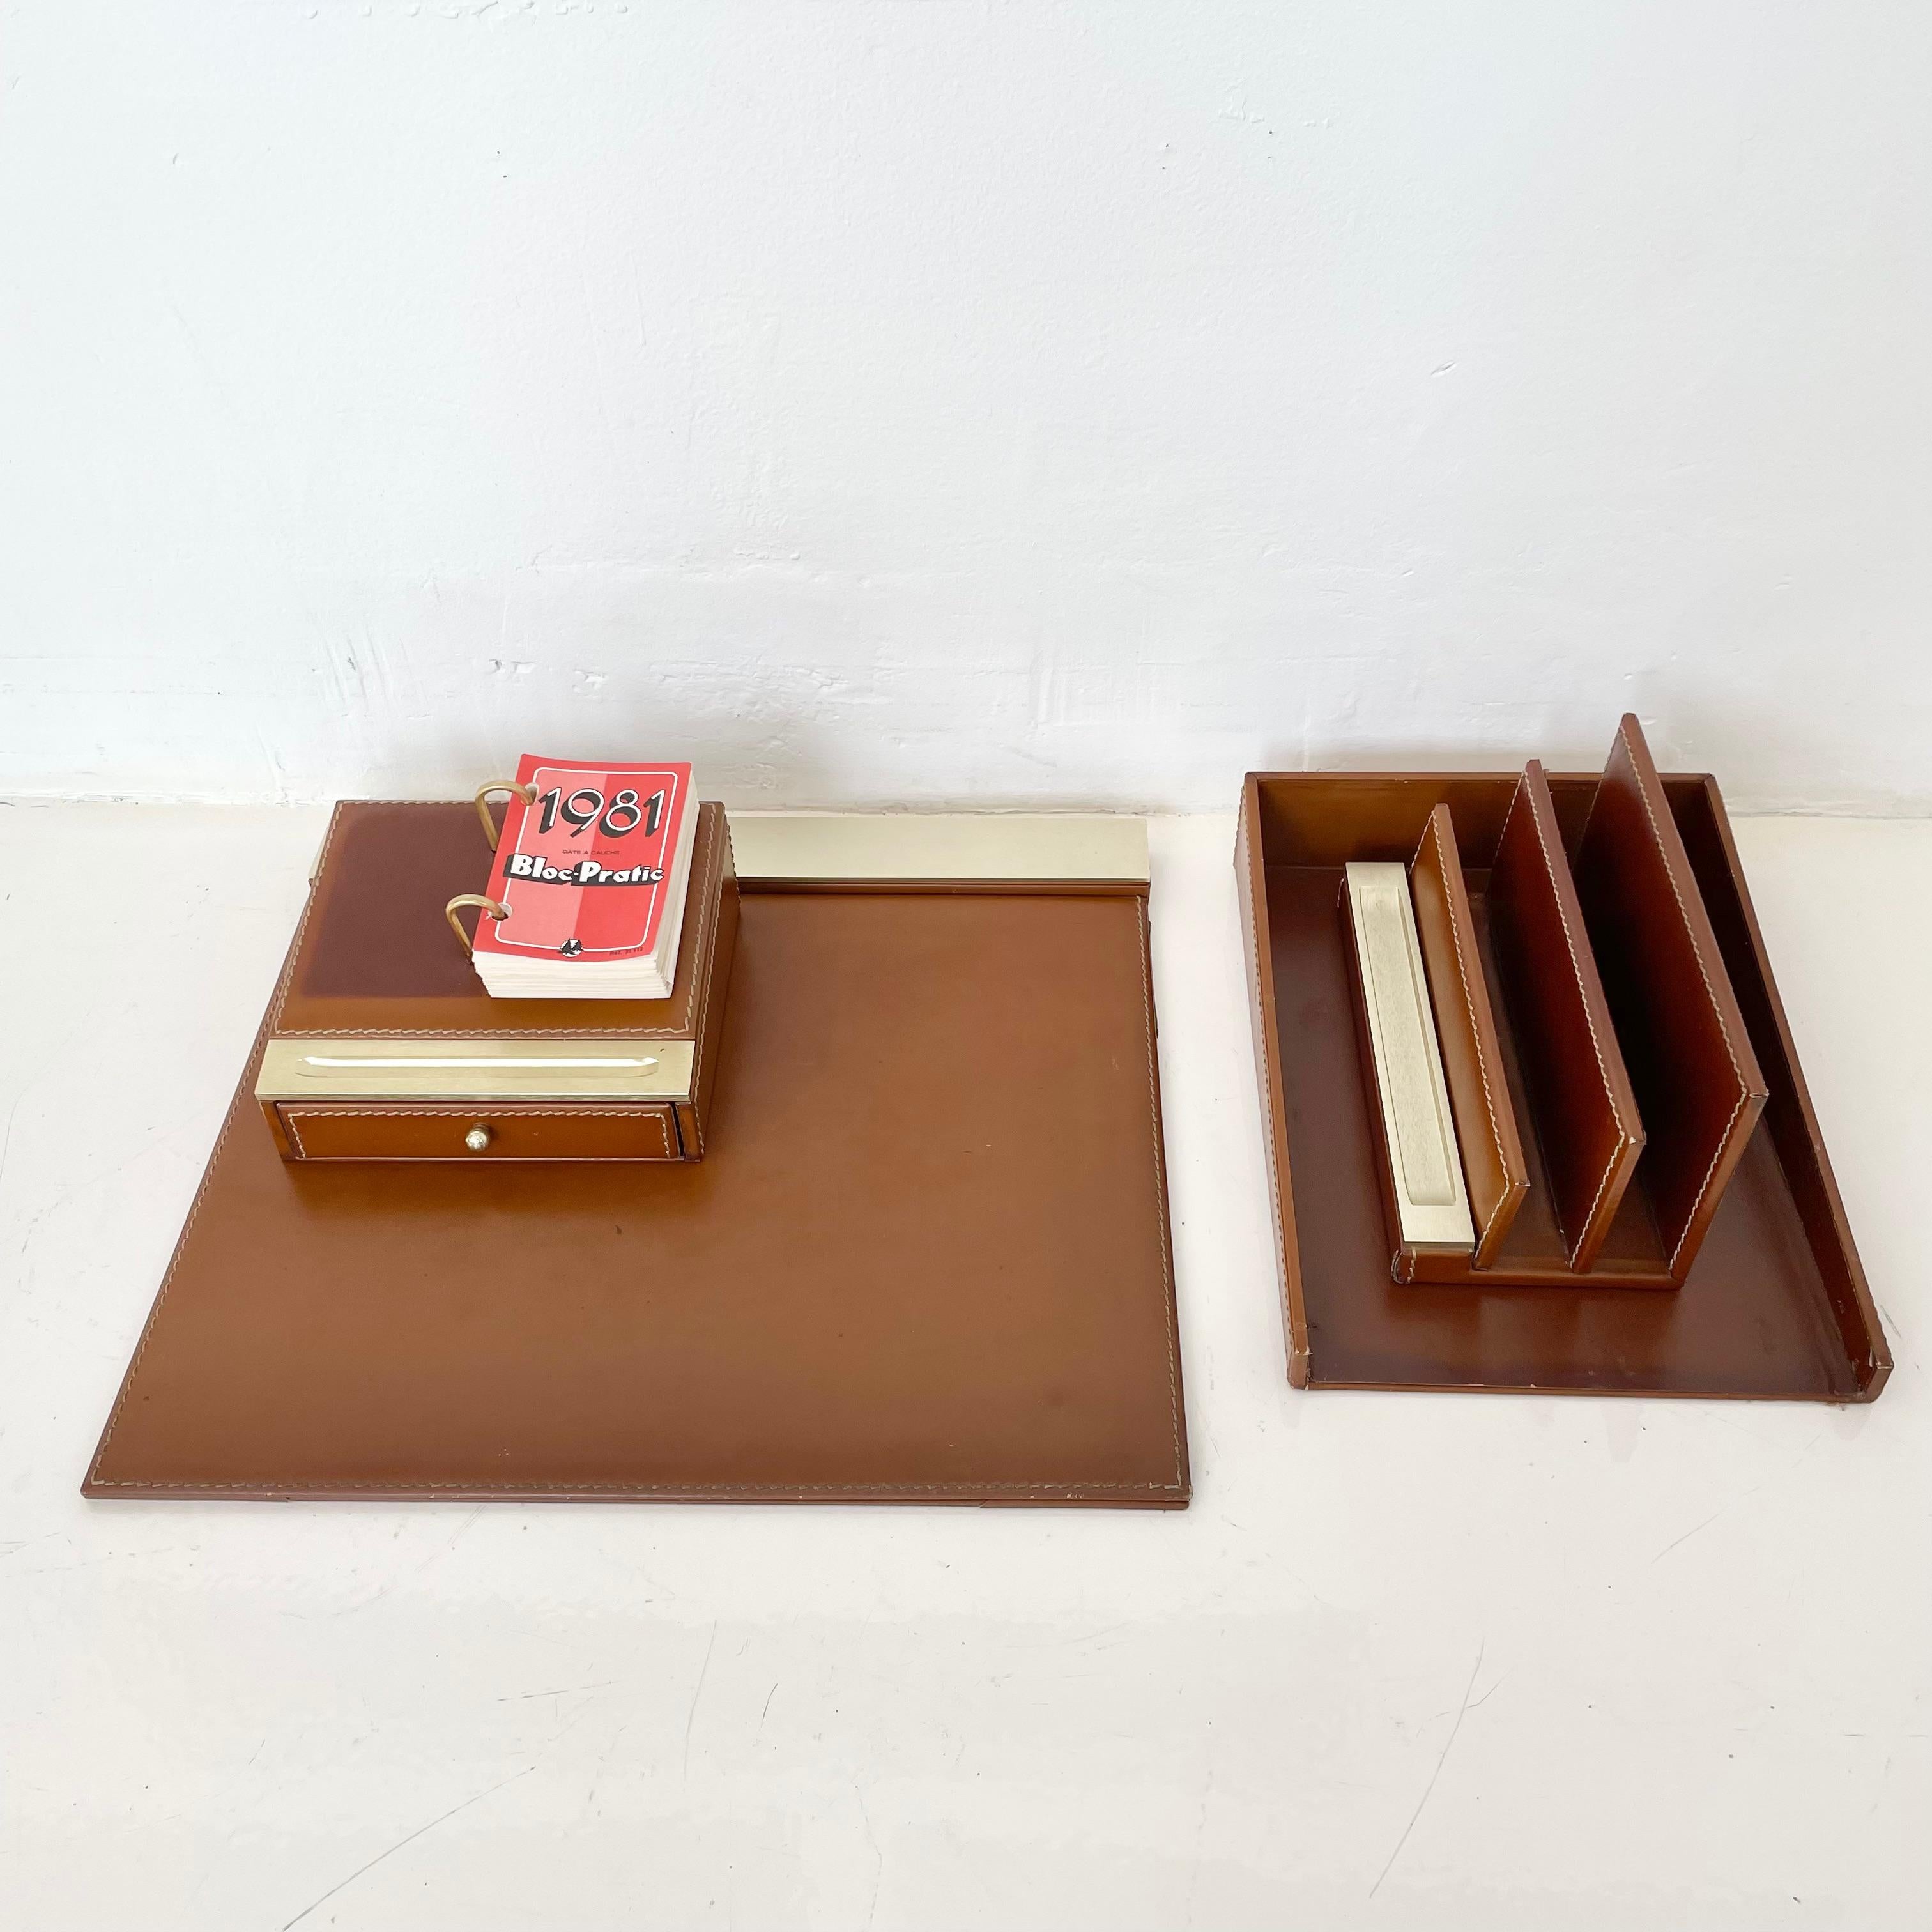 Fantastic 4-piece French leather desk set by Le Tanneur. All pieces wrapped in camel leather. Desk set includes: desk pad, mail holder, paper tray, and calendar holder. Brass trim on three of the four pieces. Two small pull out drawers underneath